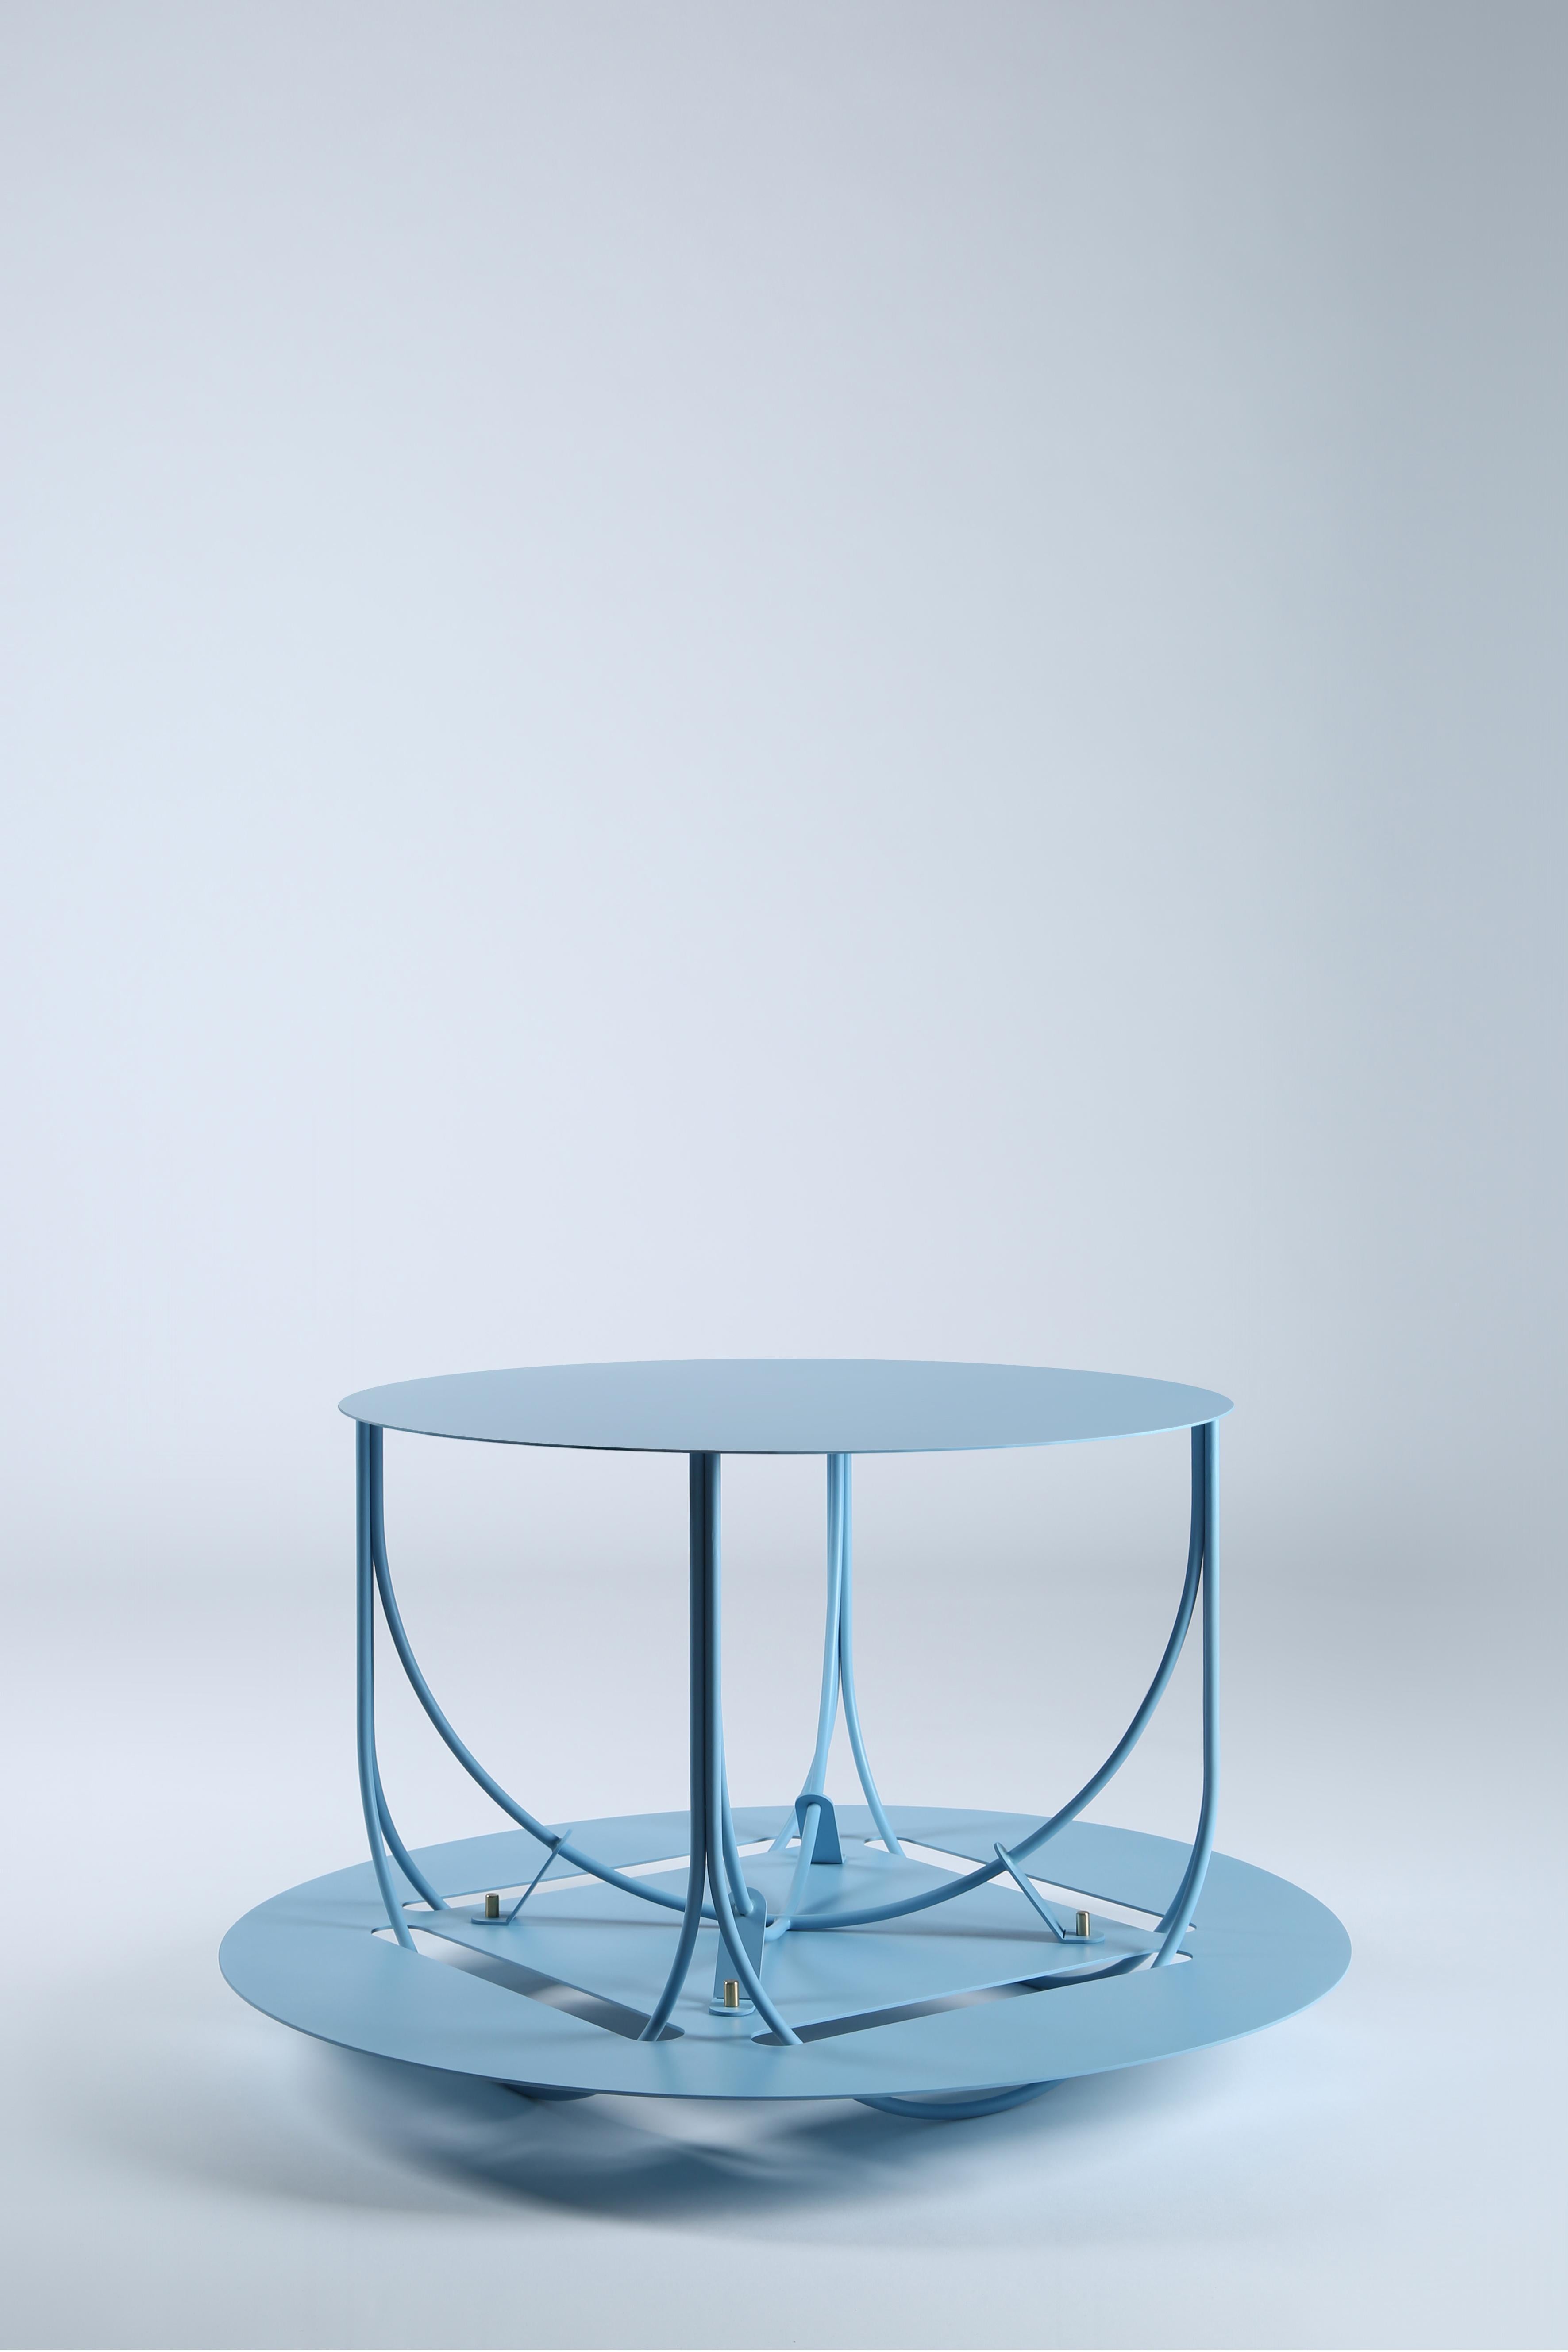 Hawa Beirut Table by Richard Yasmine In New Condition For Sale In Geneve, CH